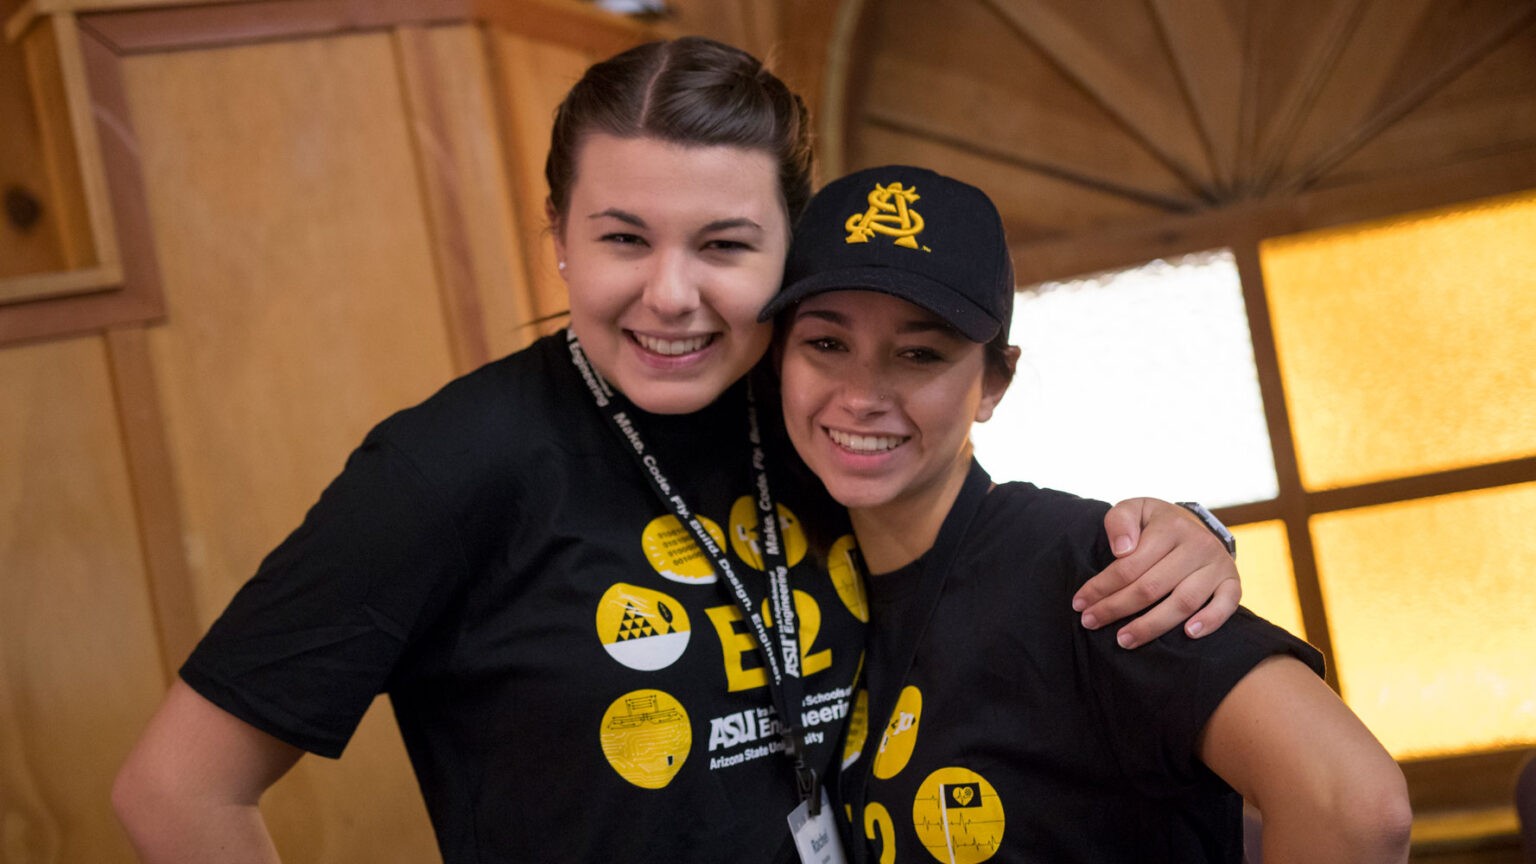 Two ASU E2 camp counselors pose for a picture, arms around each other and smiling: Rachel Scheller and Elizabeth Jones